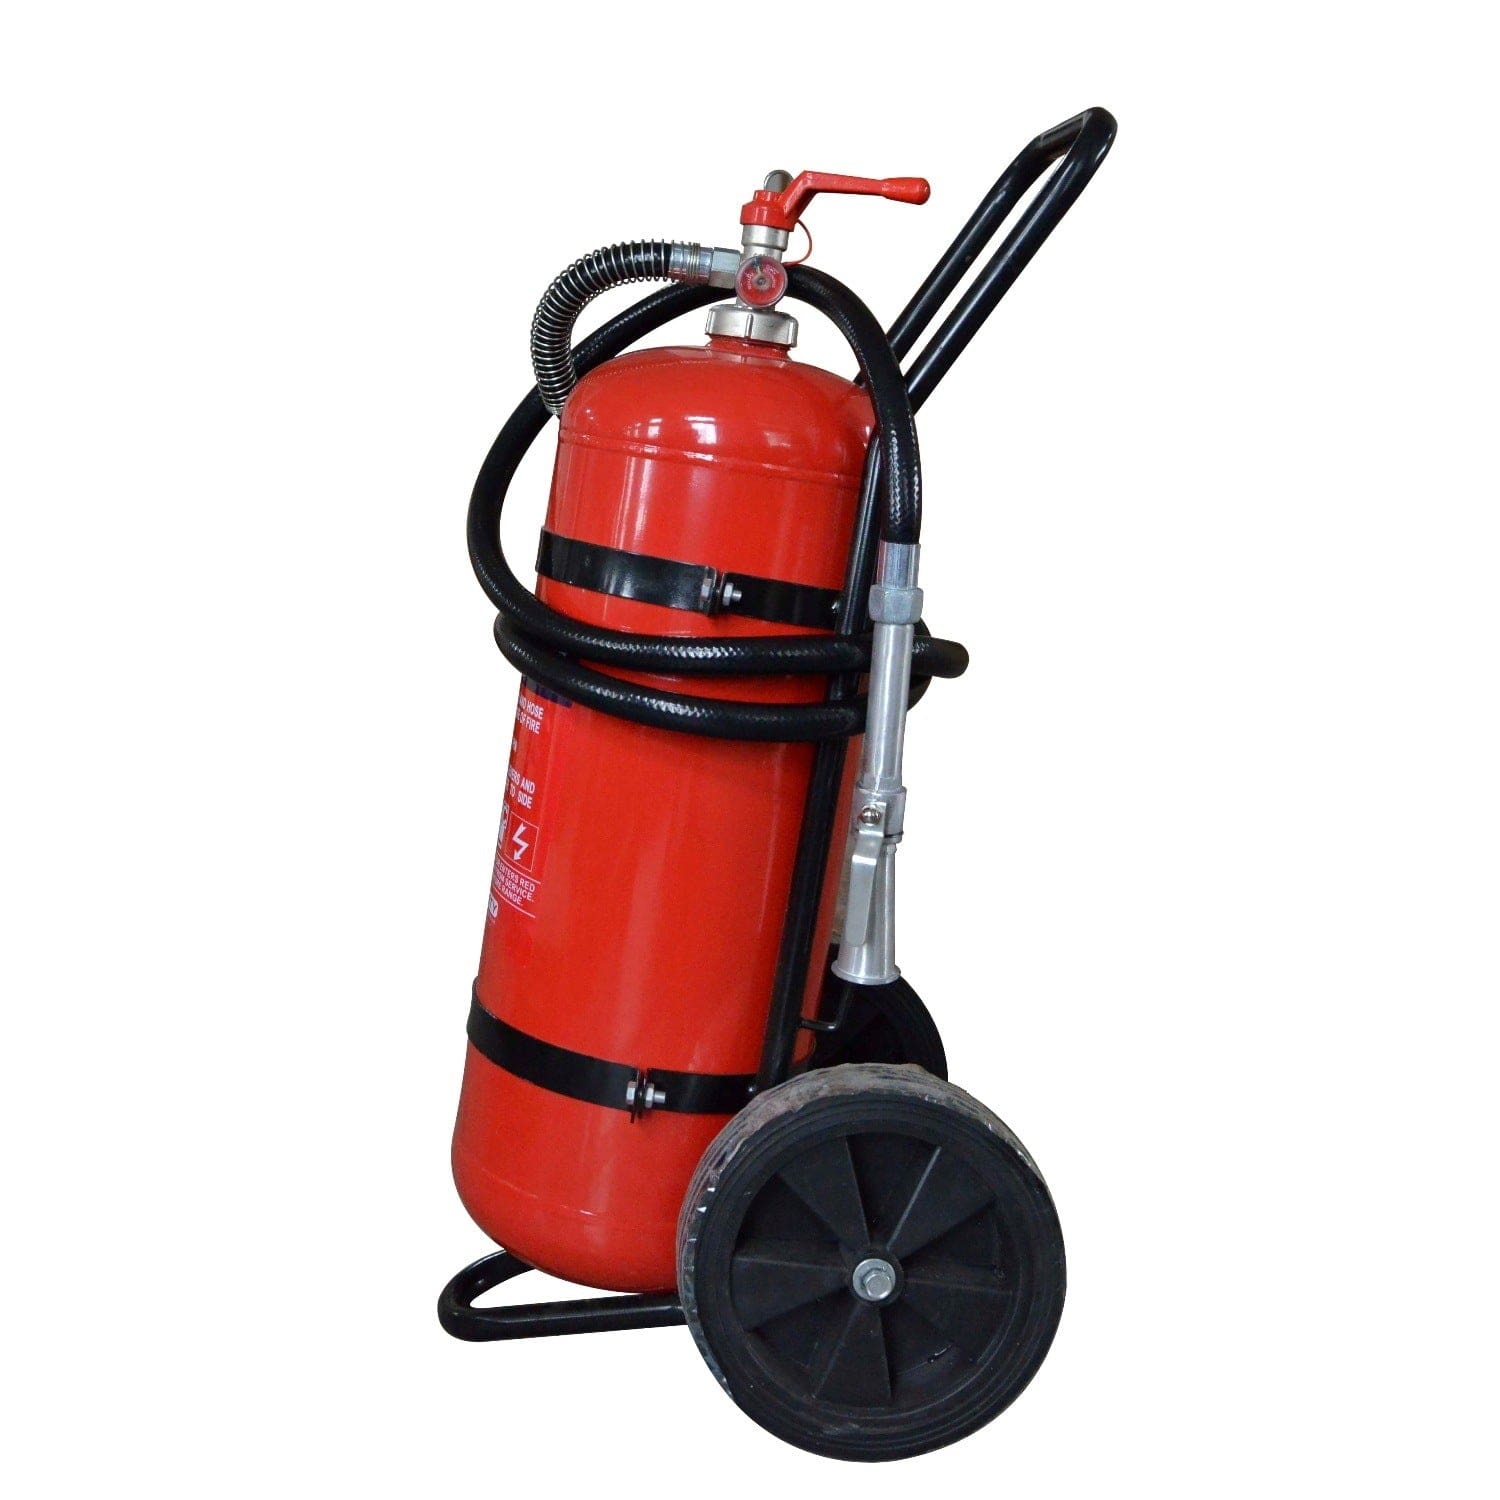 Be prepared for any fire emergency with the Lords 90% Multi-Use Dry Powder Mobile Trolley Extinguisher 50kg. This versatile and powerful extinguisher is filled with a multi-use dry powder that can effectively suppress fires involving flammable solids, liquids, gases, and electrical equipment. Get yours now on Supply Master Ghana, Accra for reliable fire protection. Fire Extinguisher Buy Tools hardware Building materials